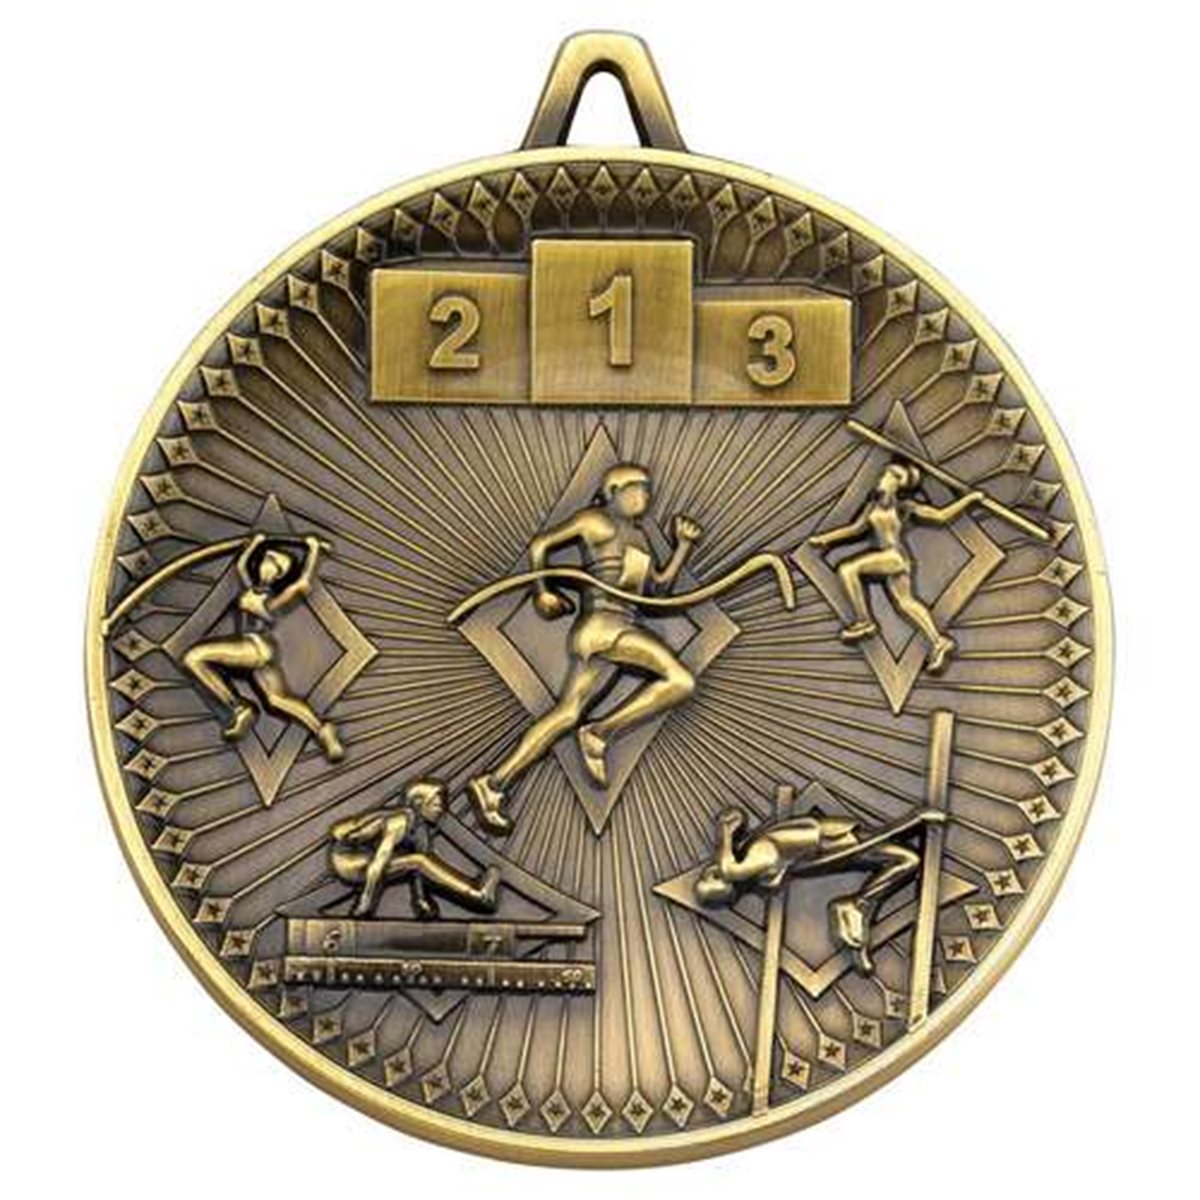 60mm Deluxe Athletics Medal DM10 in Gold, Silver & Bronze